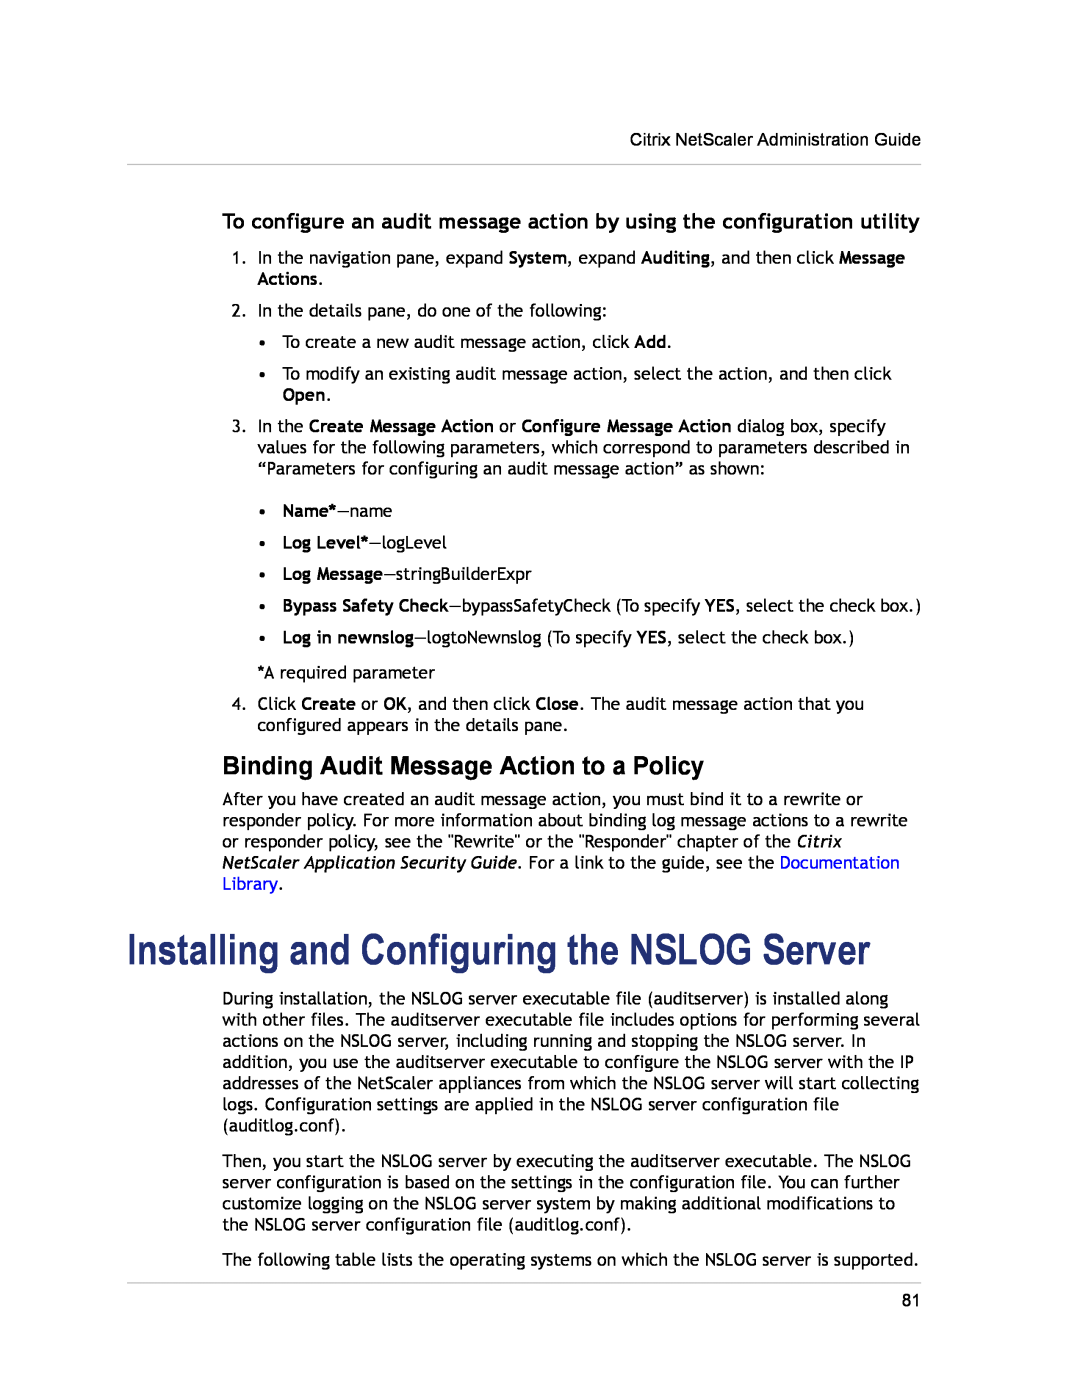 Citrix Systems CITRIX NETSCALER 9.3 Installing and Configuring the NSLOG Server, Binding Audit Message Action to a Policy 